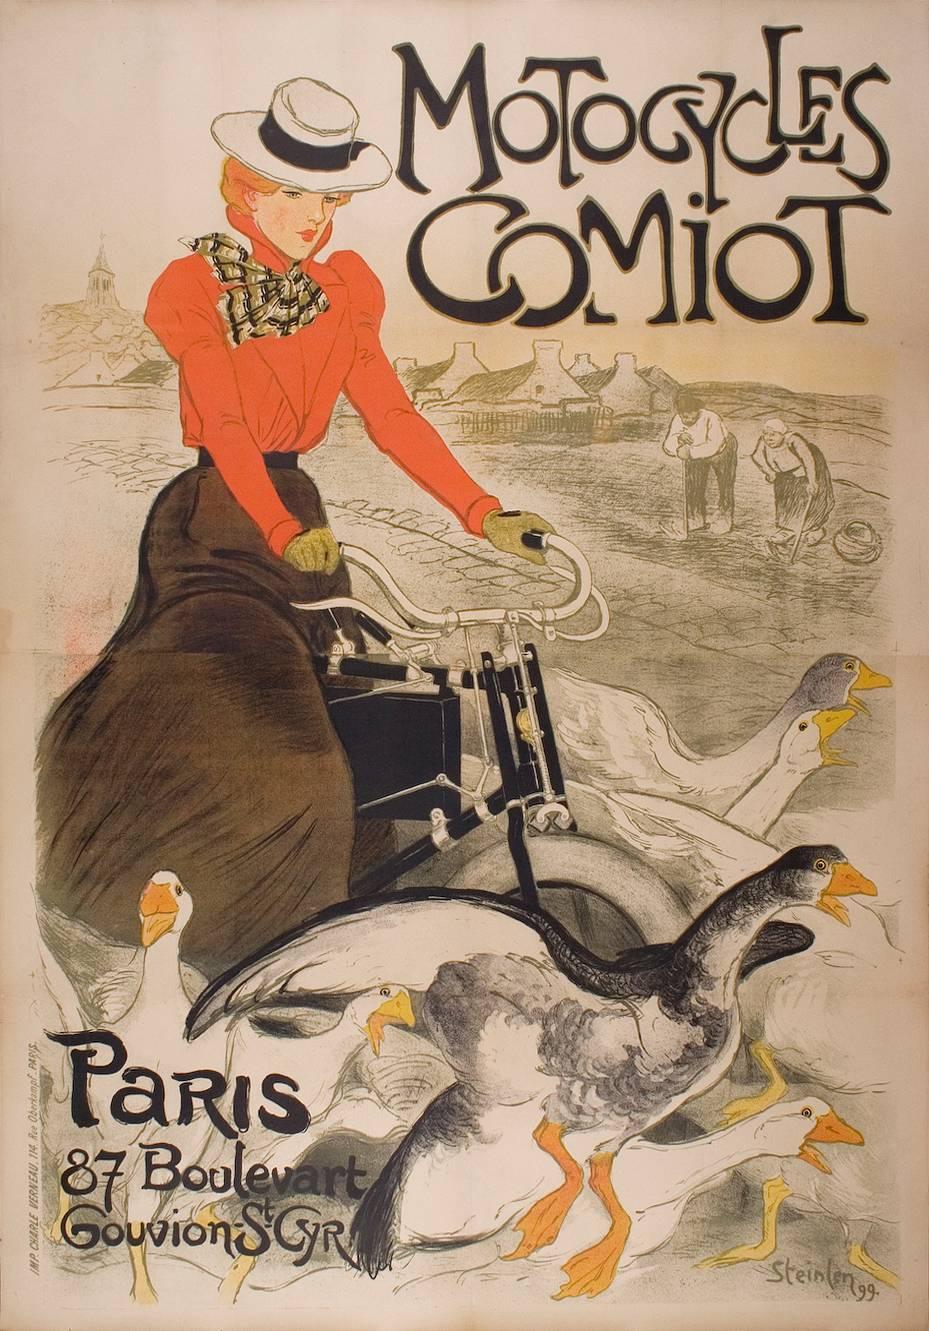 Large French Turn of the Century Motorcycle Poster by Steinlen, 1899 - Print by Théophile Alexandre Steinlen